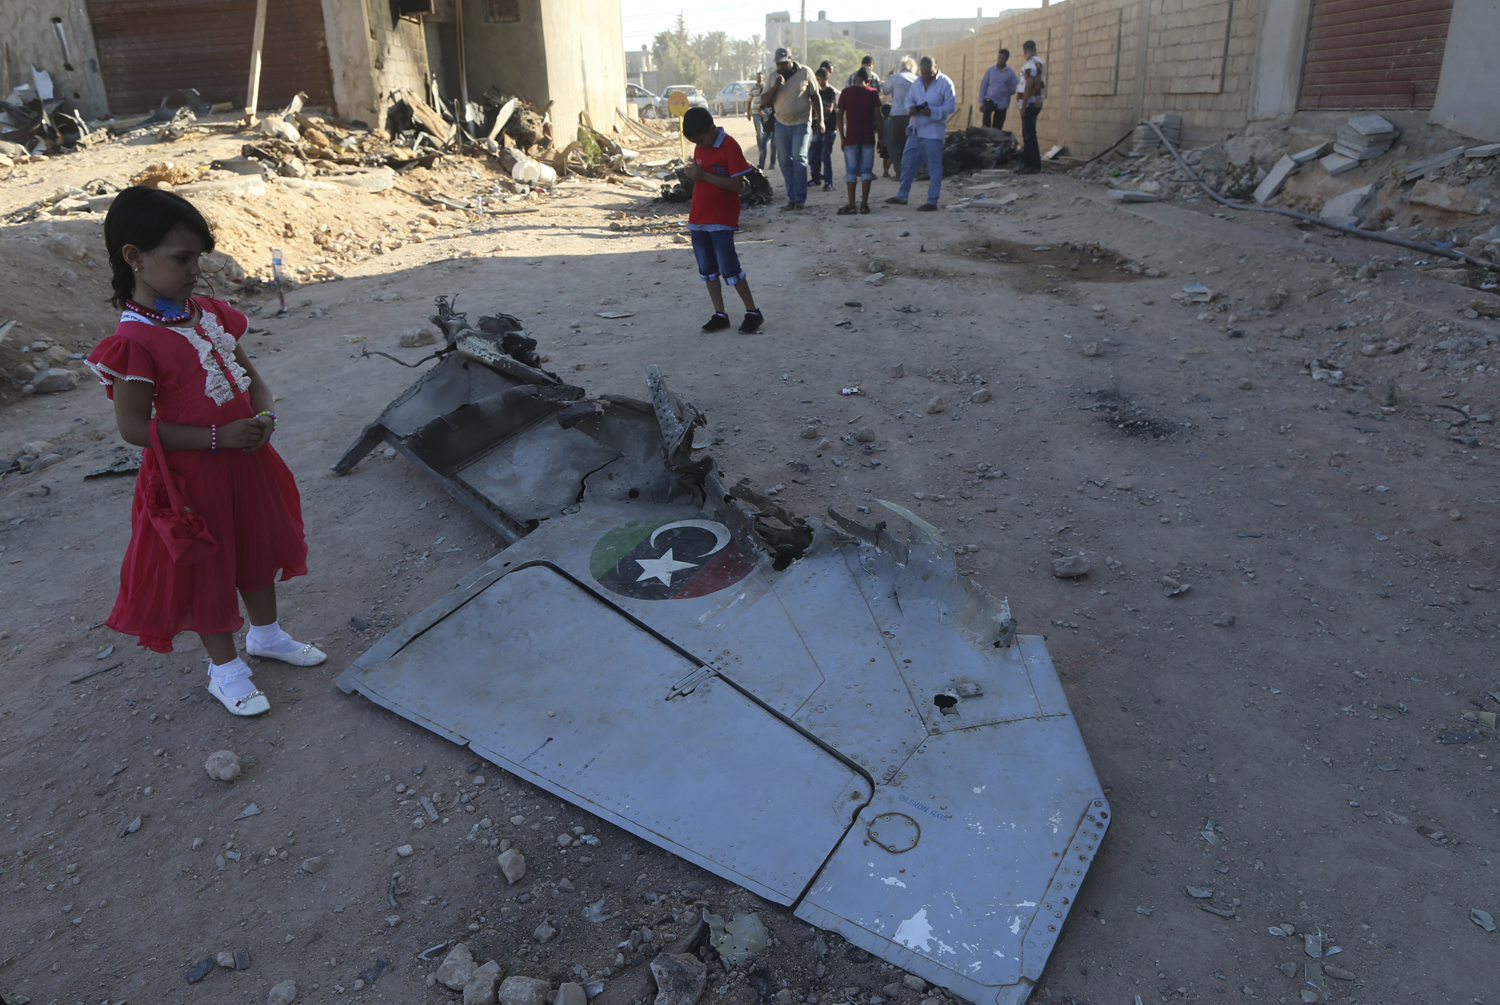 A Libyan girl stands next to the wreckage of a government MiG warplane that crashed during clashes in Benghazi, Libya, on July 29, 2014 (Esam Al-Fetori —Reuters)